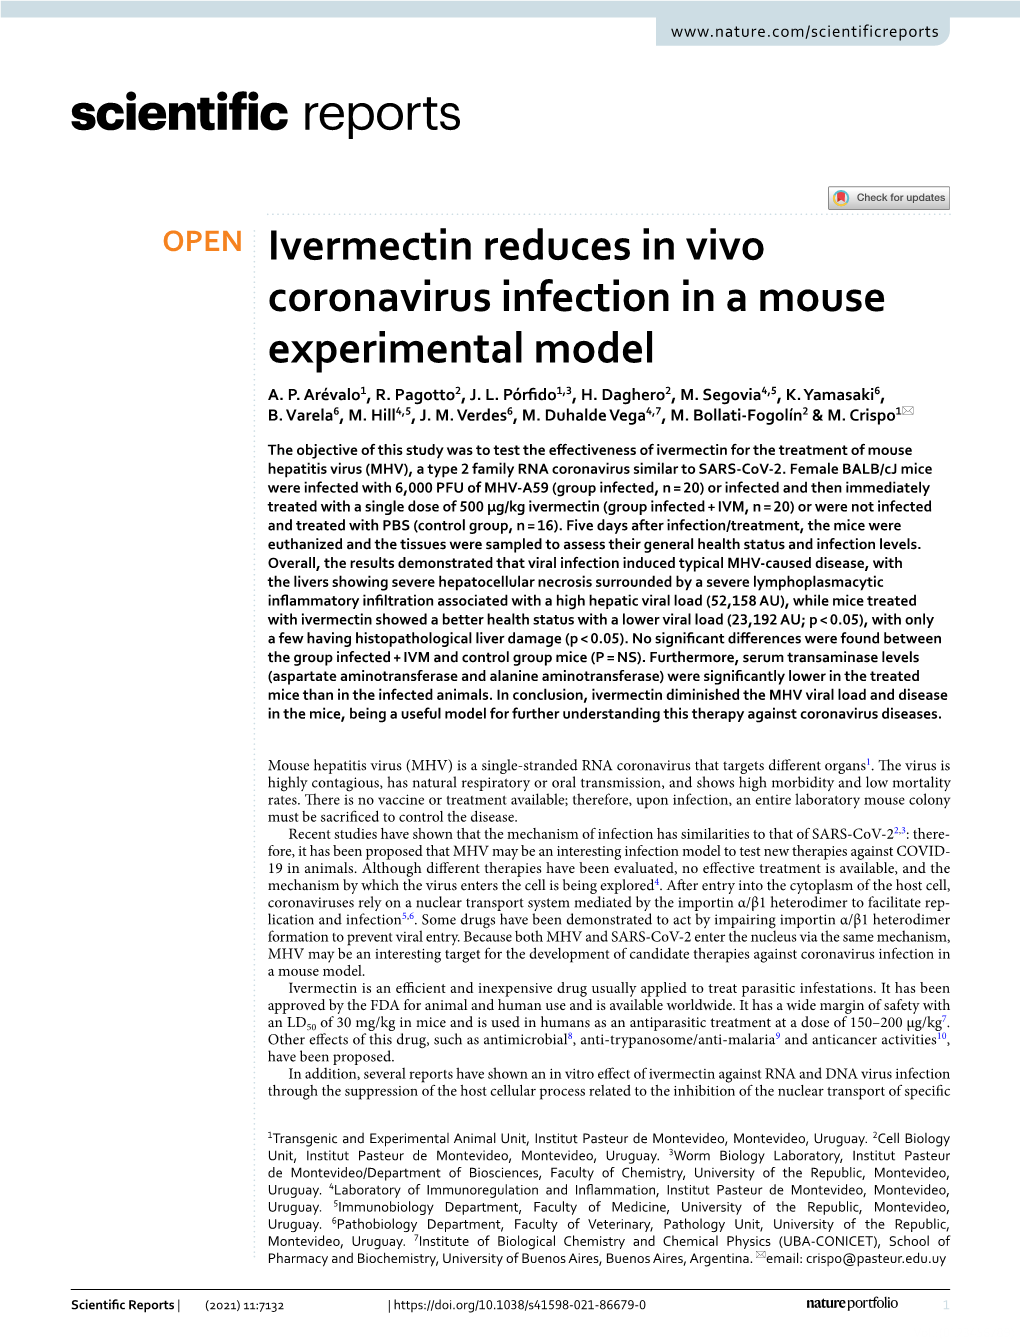 Ivermectin Reduces in Vivo Coronavirus Infection in a Mouse Experimental Model A